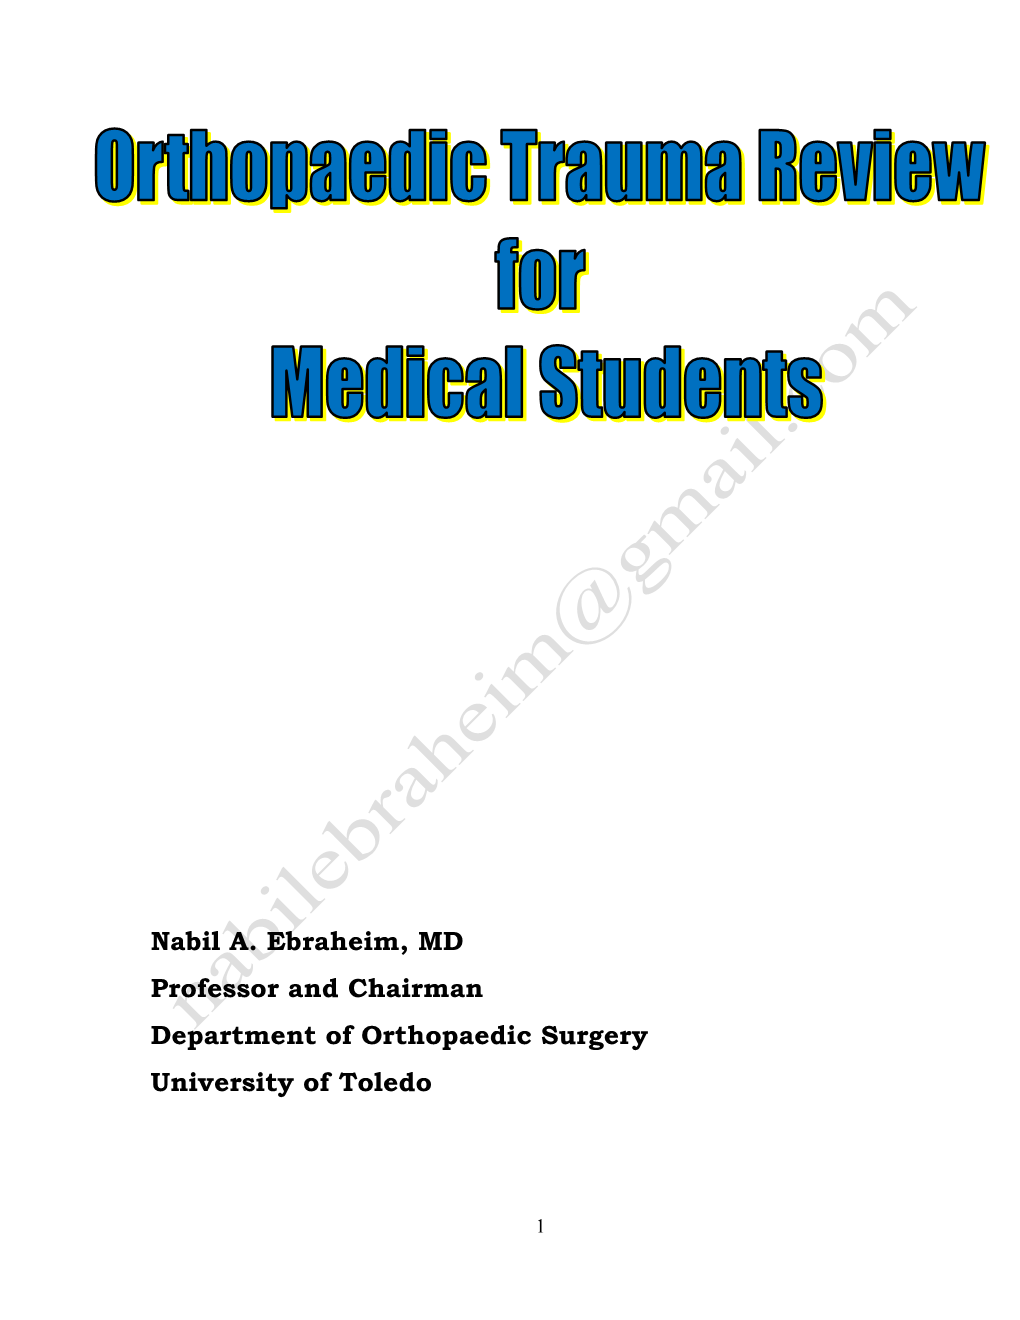 Orthopaedic Trauma Review for Medical Students